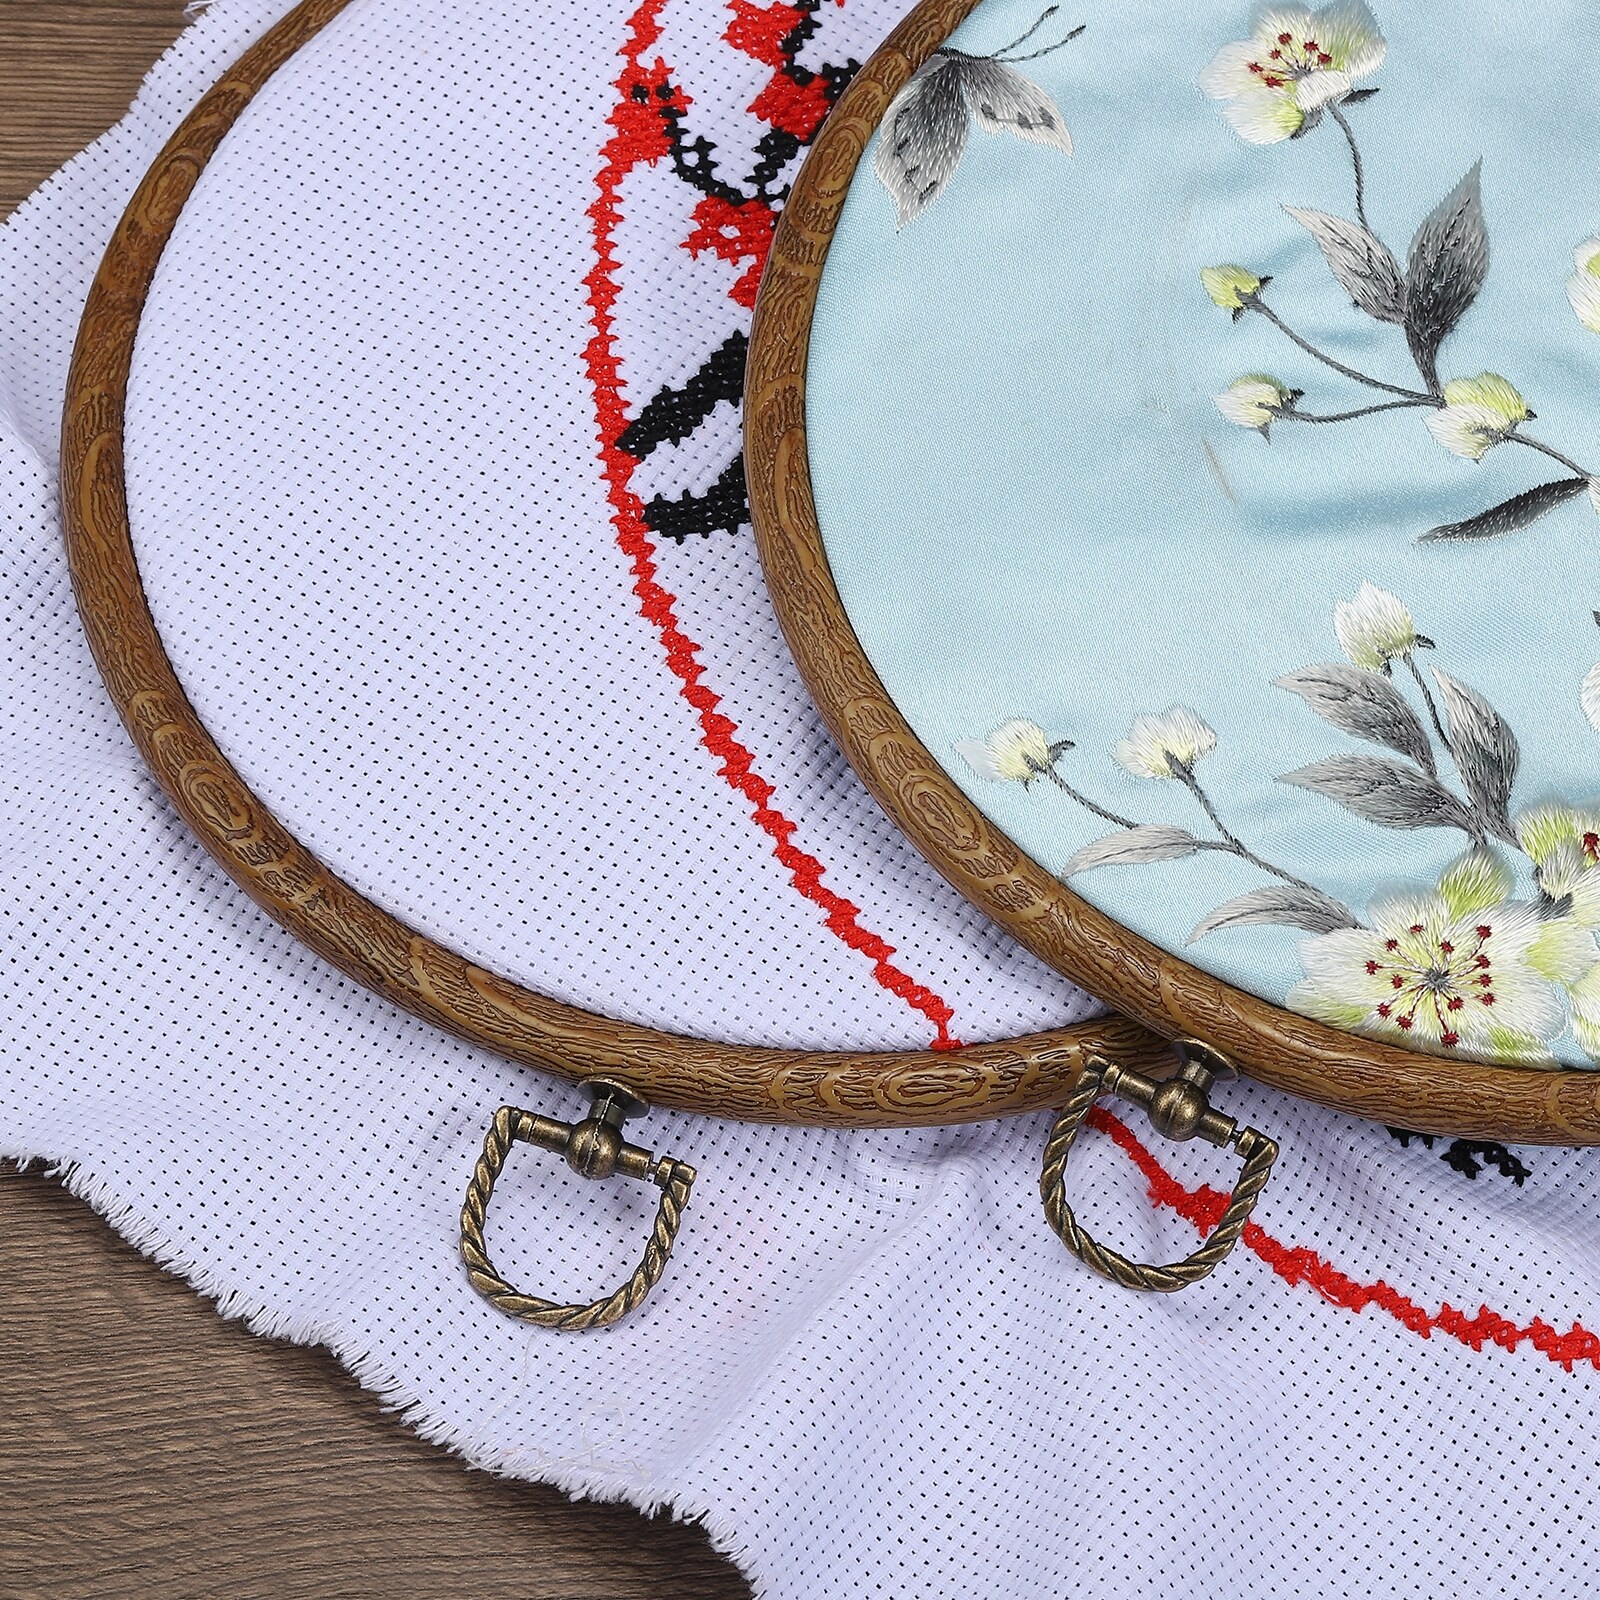  12pcs Embroidery Hoops, 6 Inch Wooden Embroidery Circle for  Embroidery and Cross Stitch, DIY Art Craft